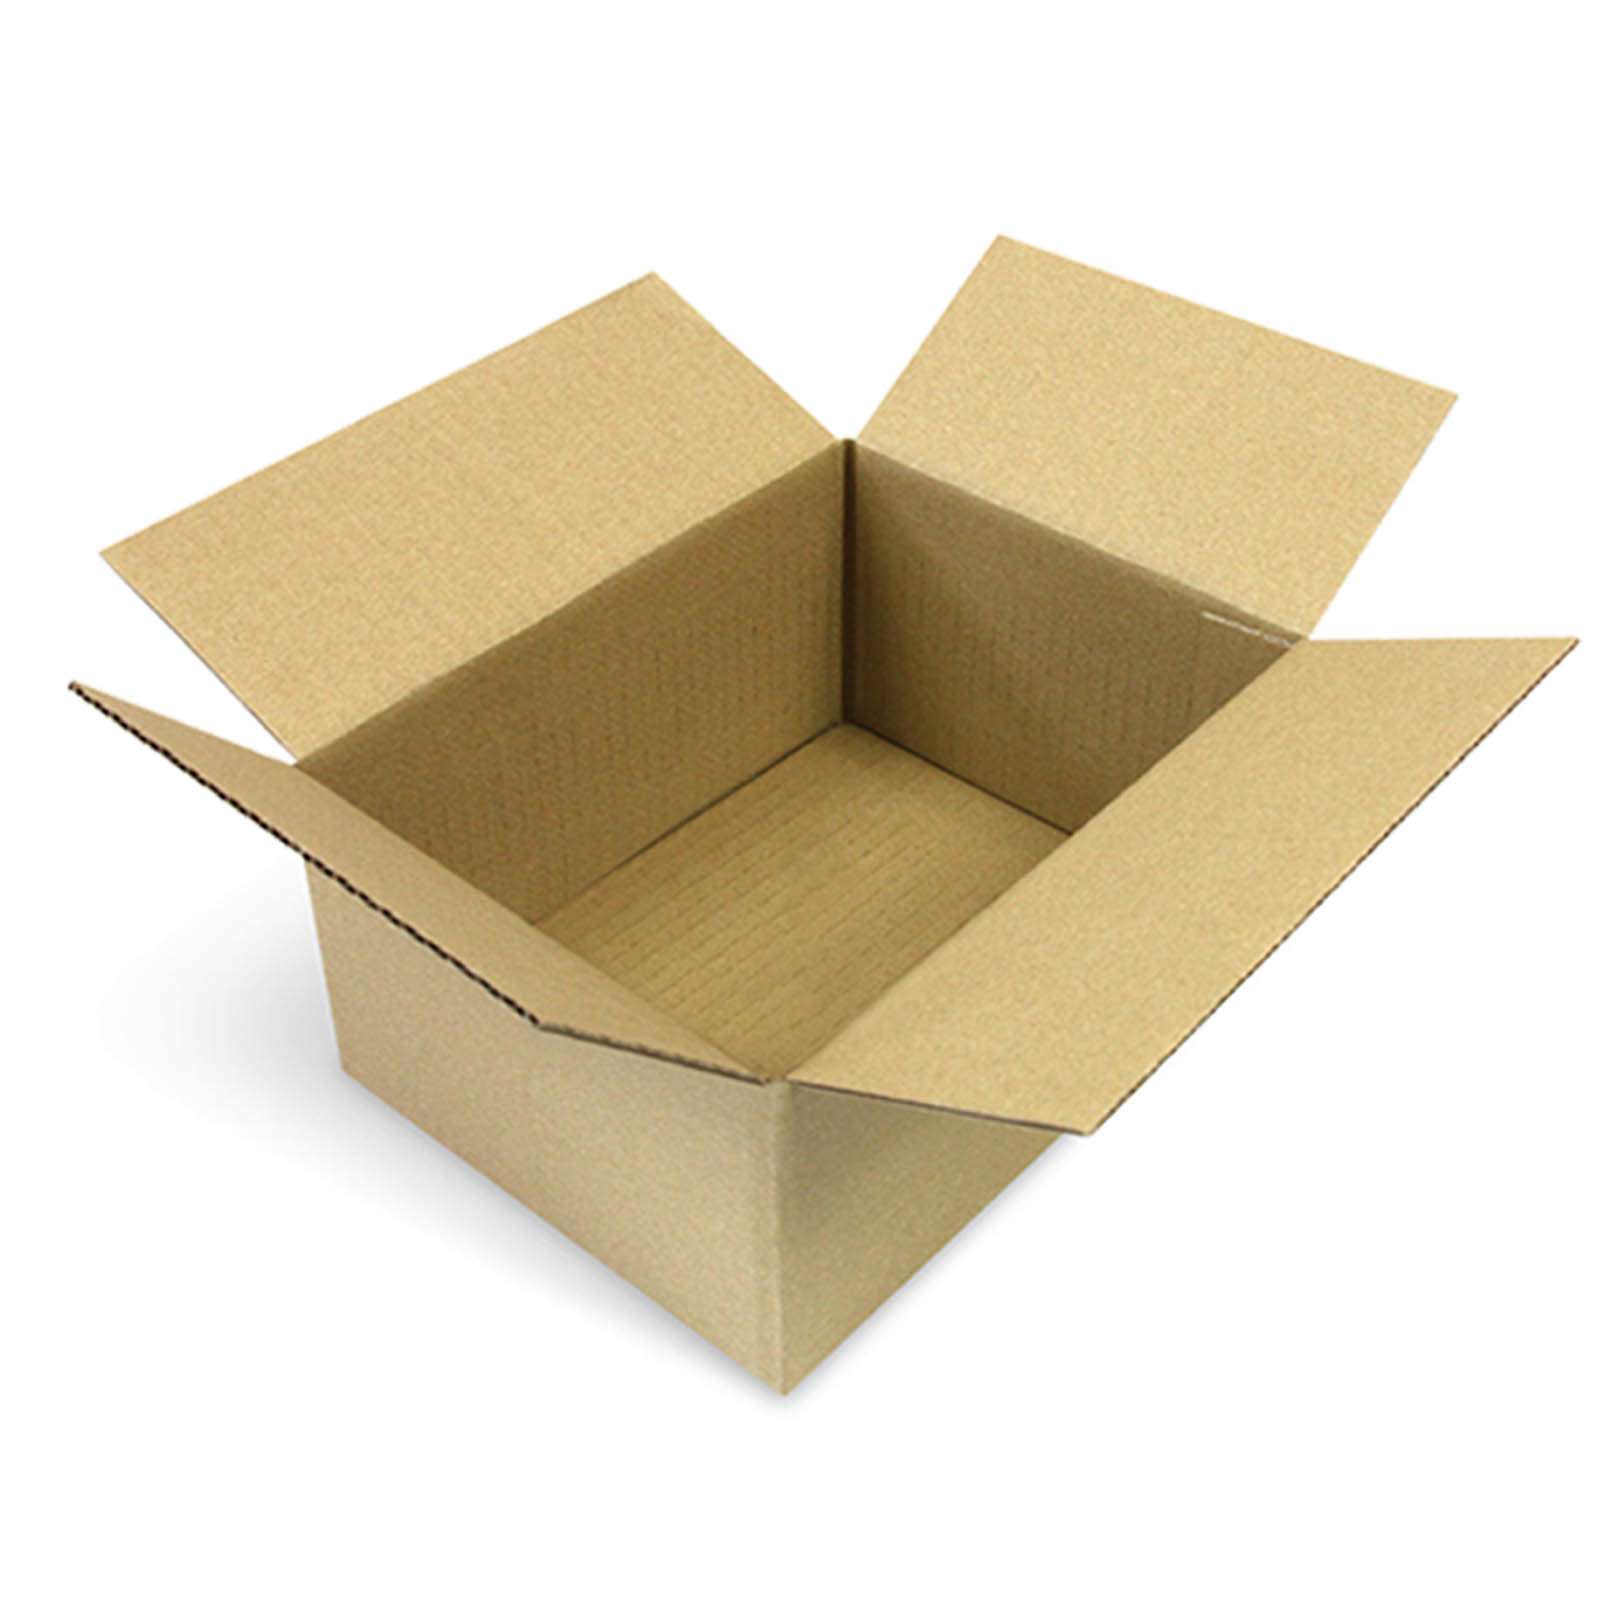 Cardboard carton 200x150x90 mm - with digital print 2-sided (neighbouring sides)